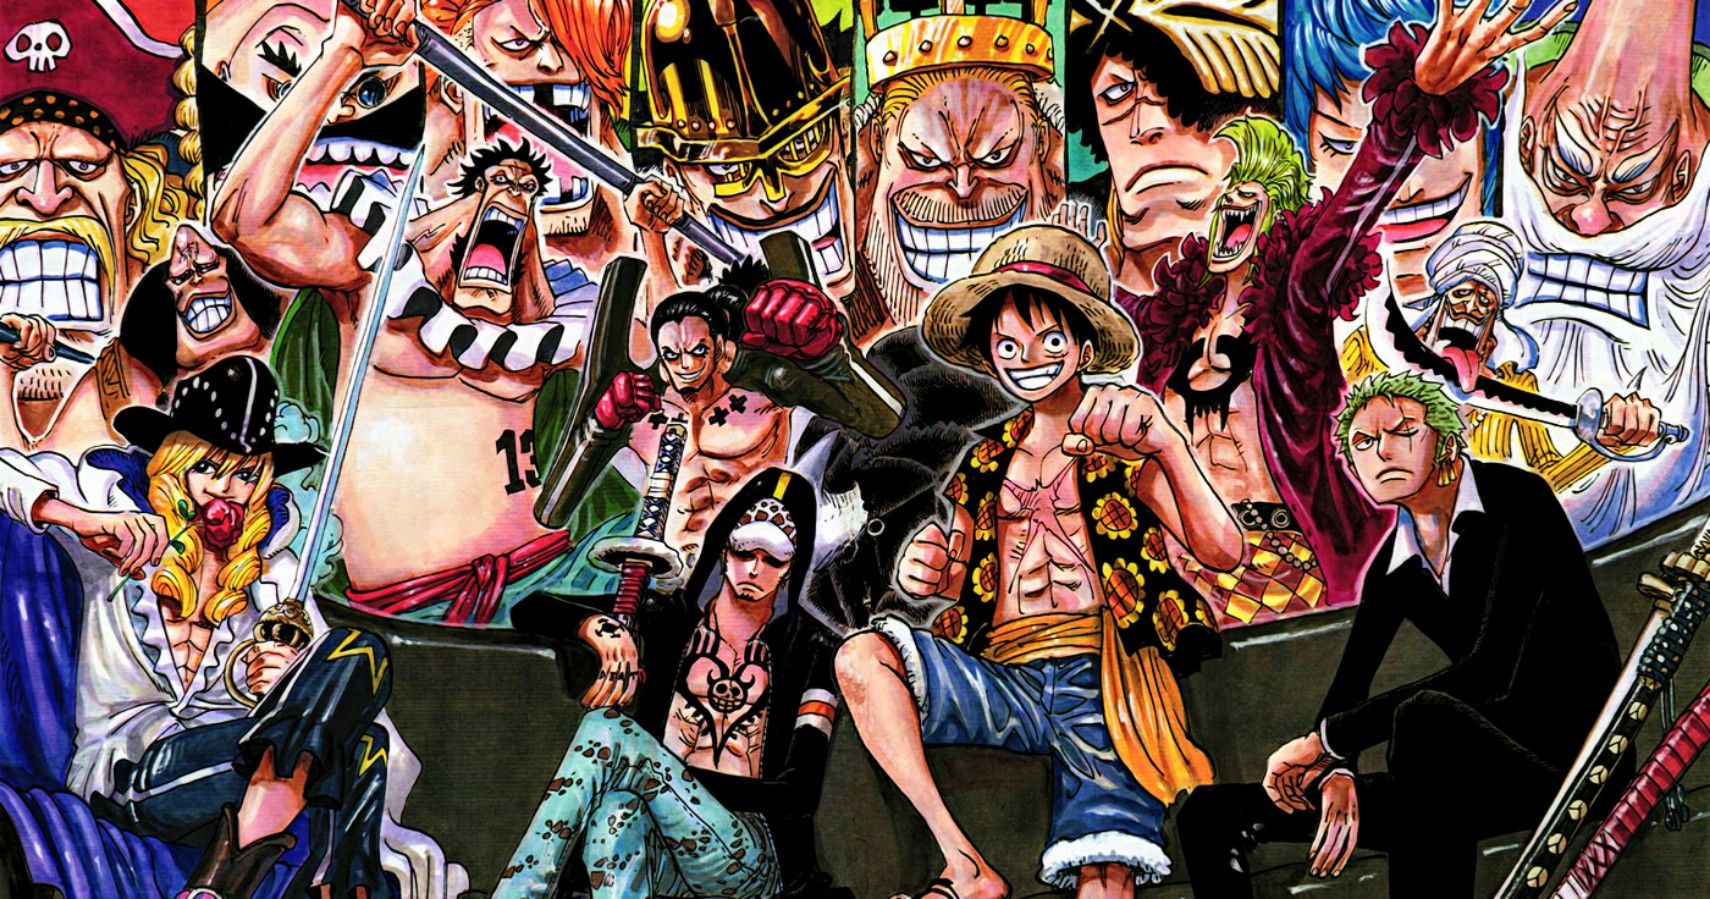 One Piece's Anime Just Made a Straw Hat's Character Even Better - IMDb